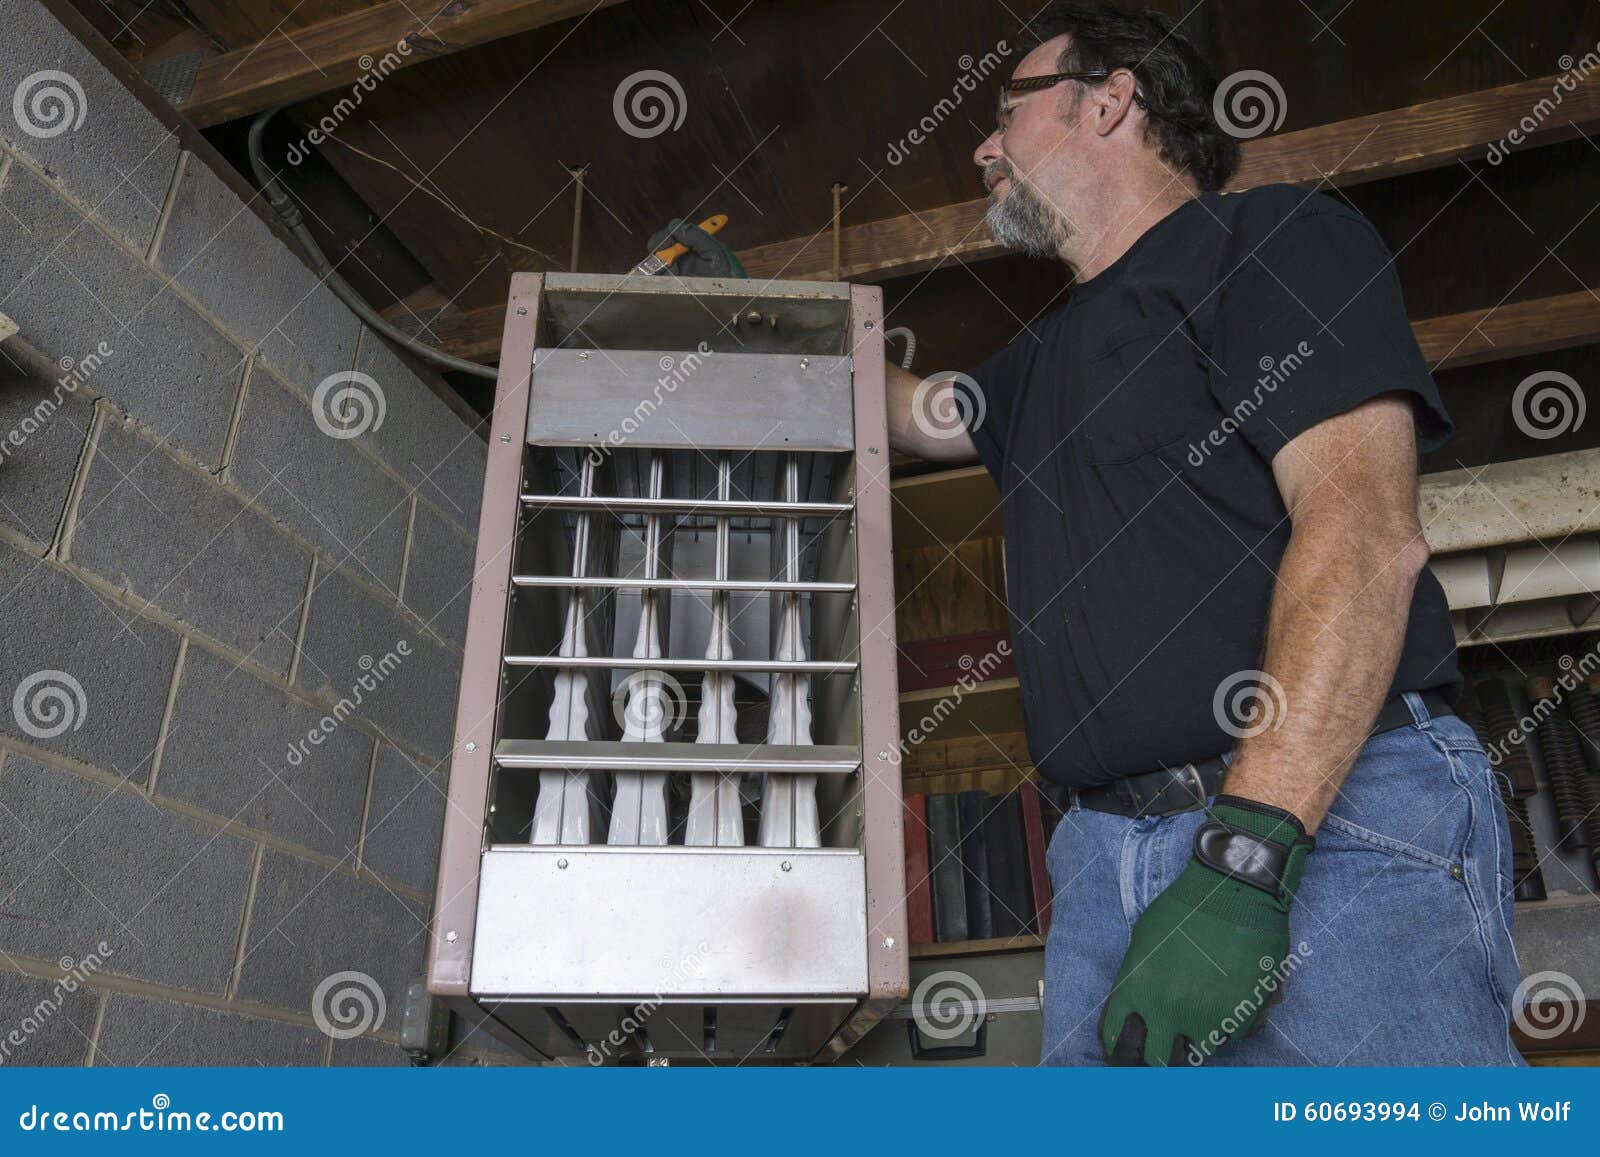 Technician Cleaning Top Of Overhead Gas Heater Stock Photo Image